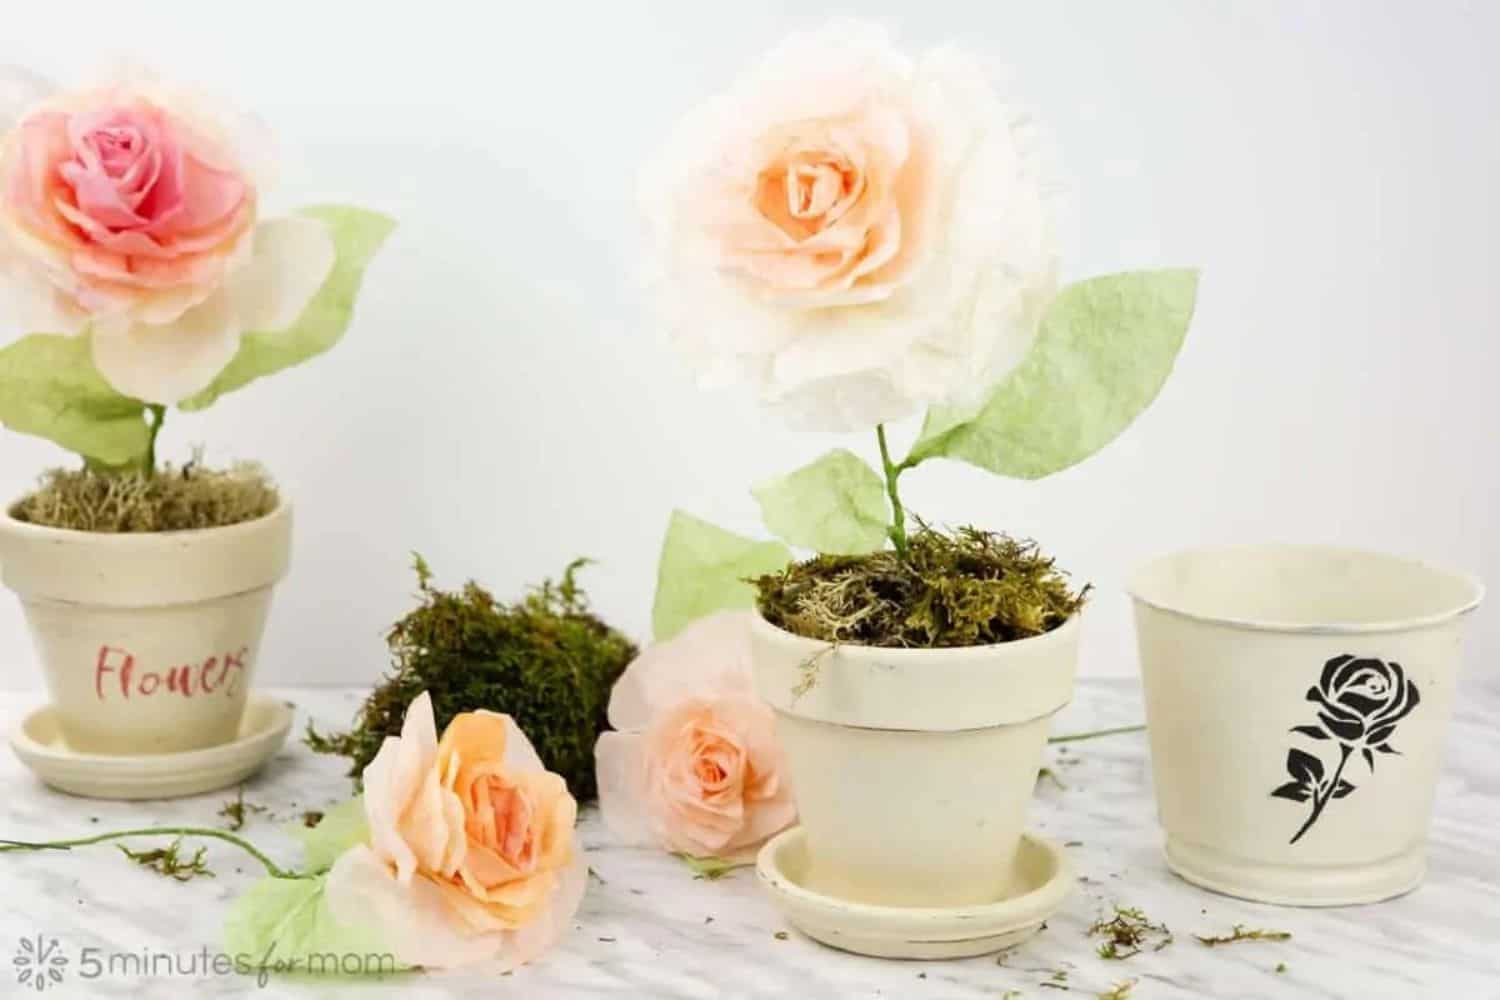 distressed flower pot with a rose inside